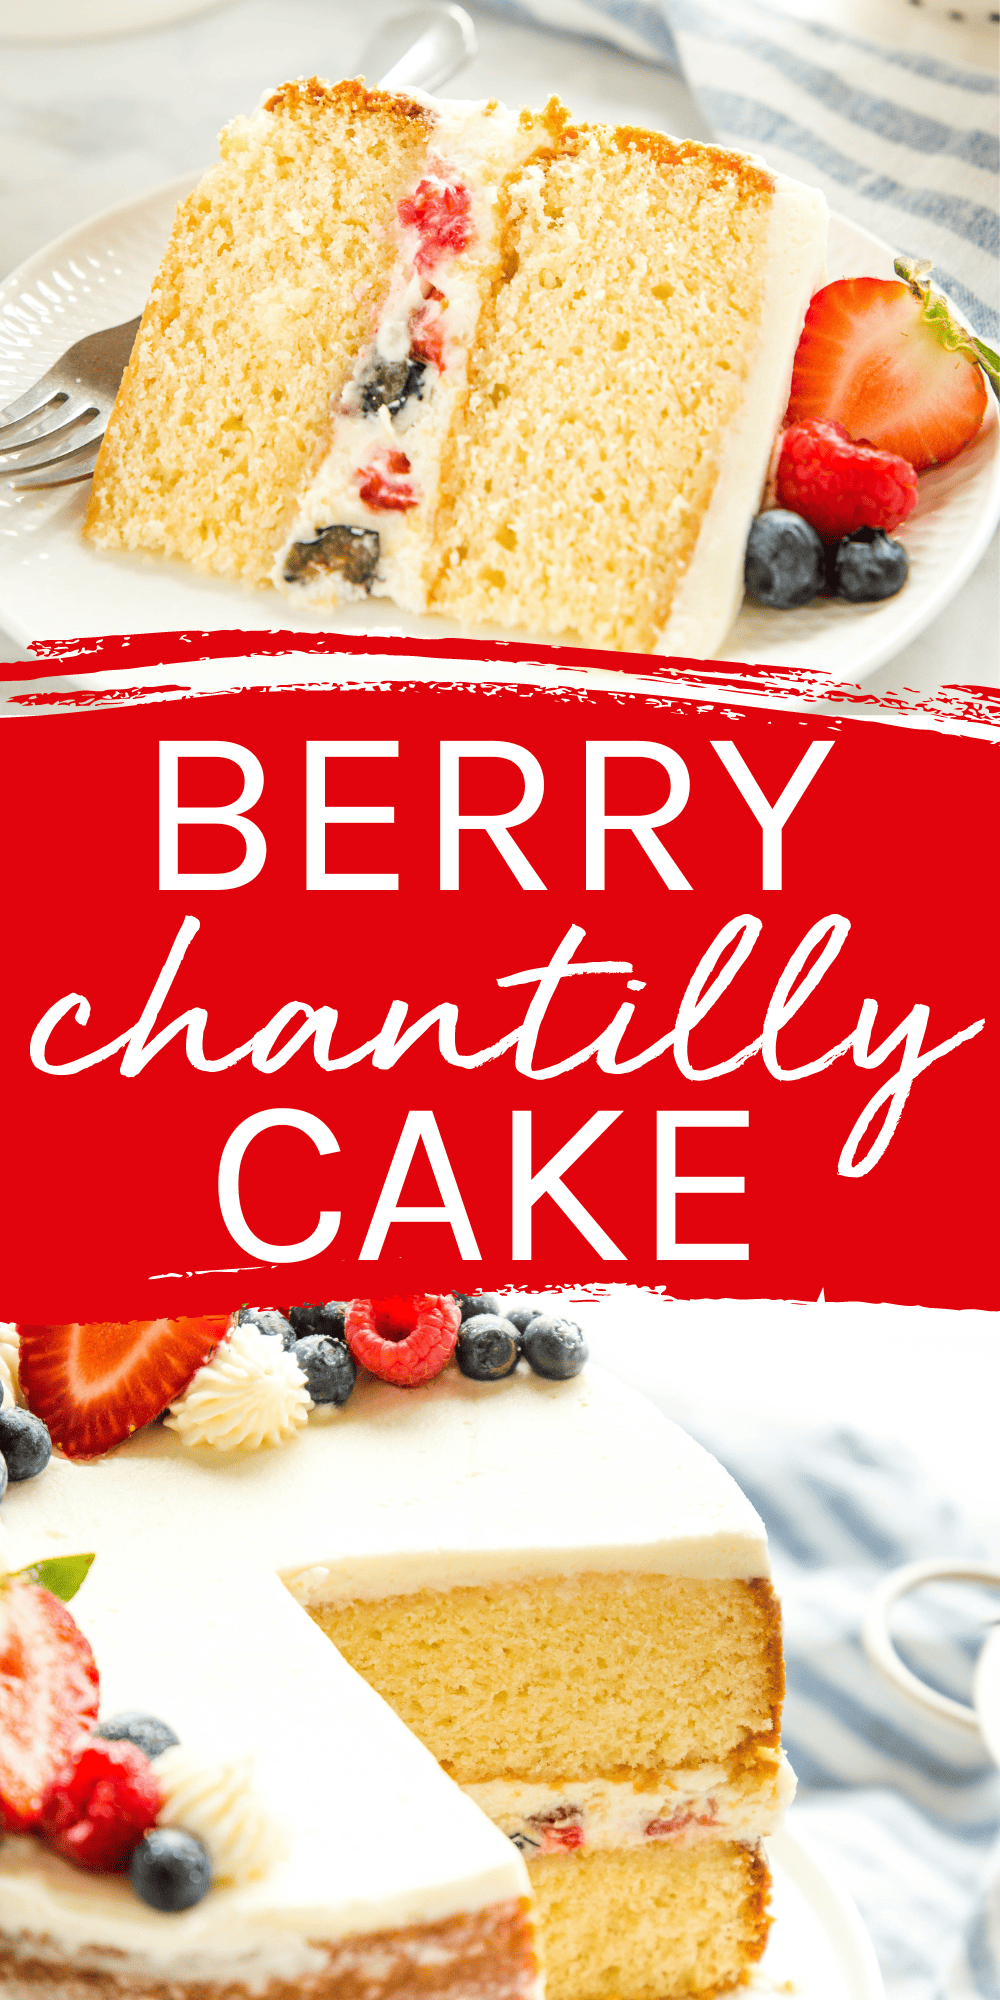 This Berry Chantilly Cake recipe combines a tender & light white cake with a rich & creamy Chantilly Cream frosting & fresh seasonal berries. Recipe from thebusybaker.ca! #berrychantillycake #chantillycake #berrycake #summercake #homemadecake #cakerecipe #chantilly #chantillycream #frosting #homemadefrosting #cakewithberries #whitecakerecipe via @busybakerblog